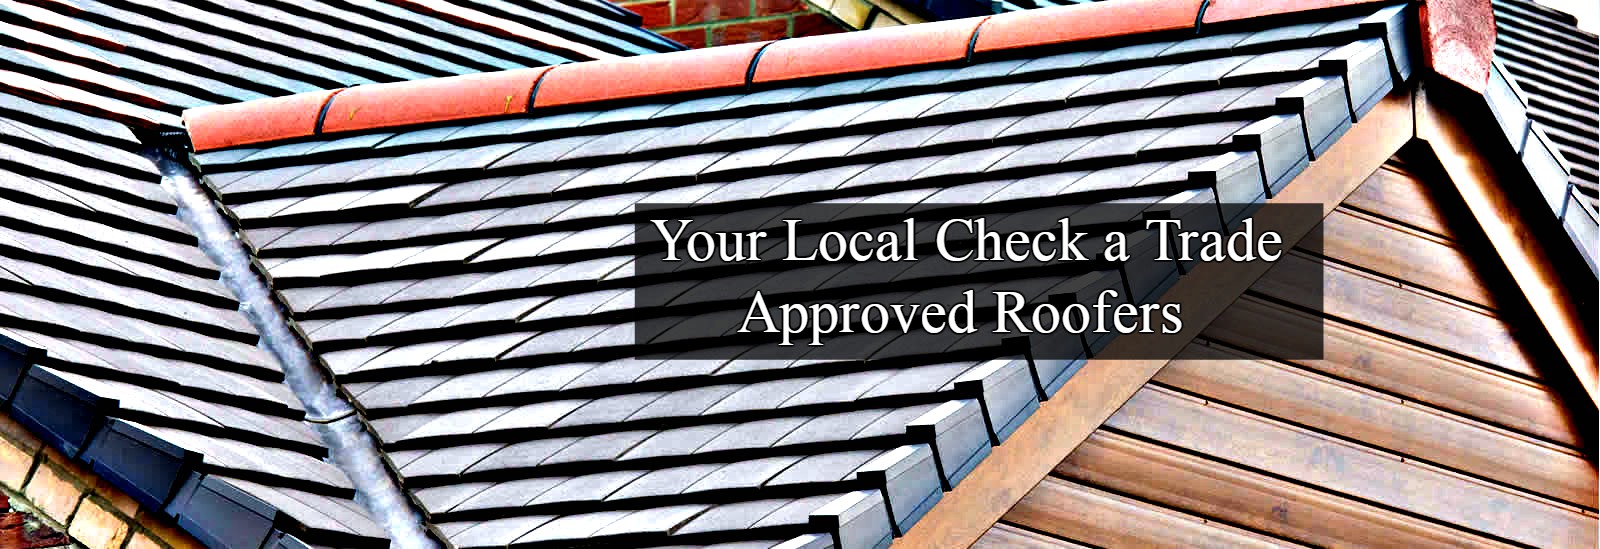 roofing services in Market Weighton